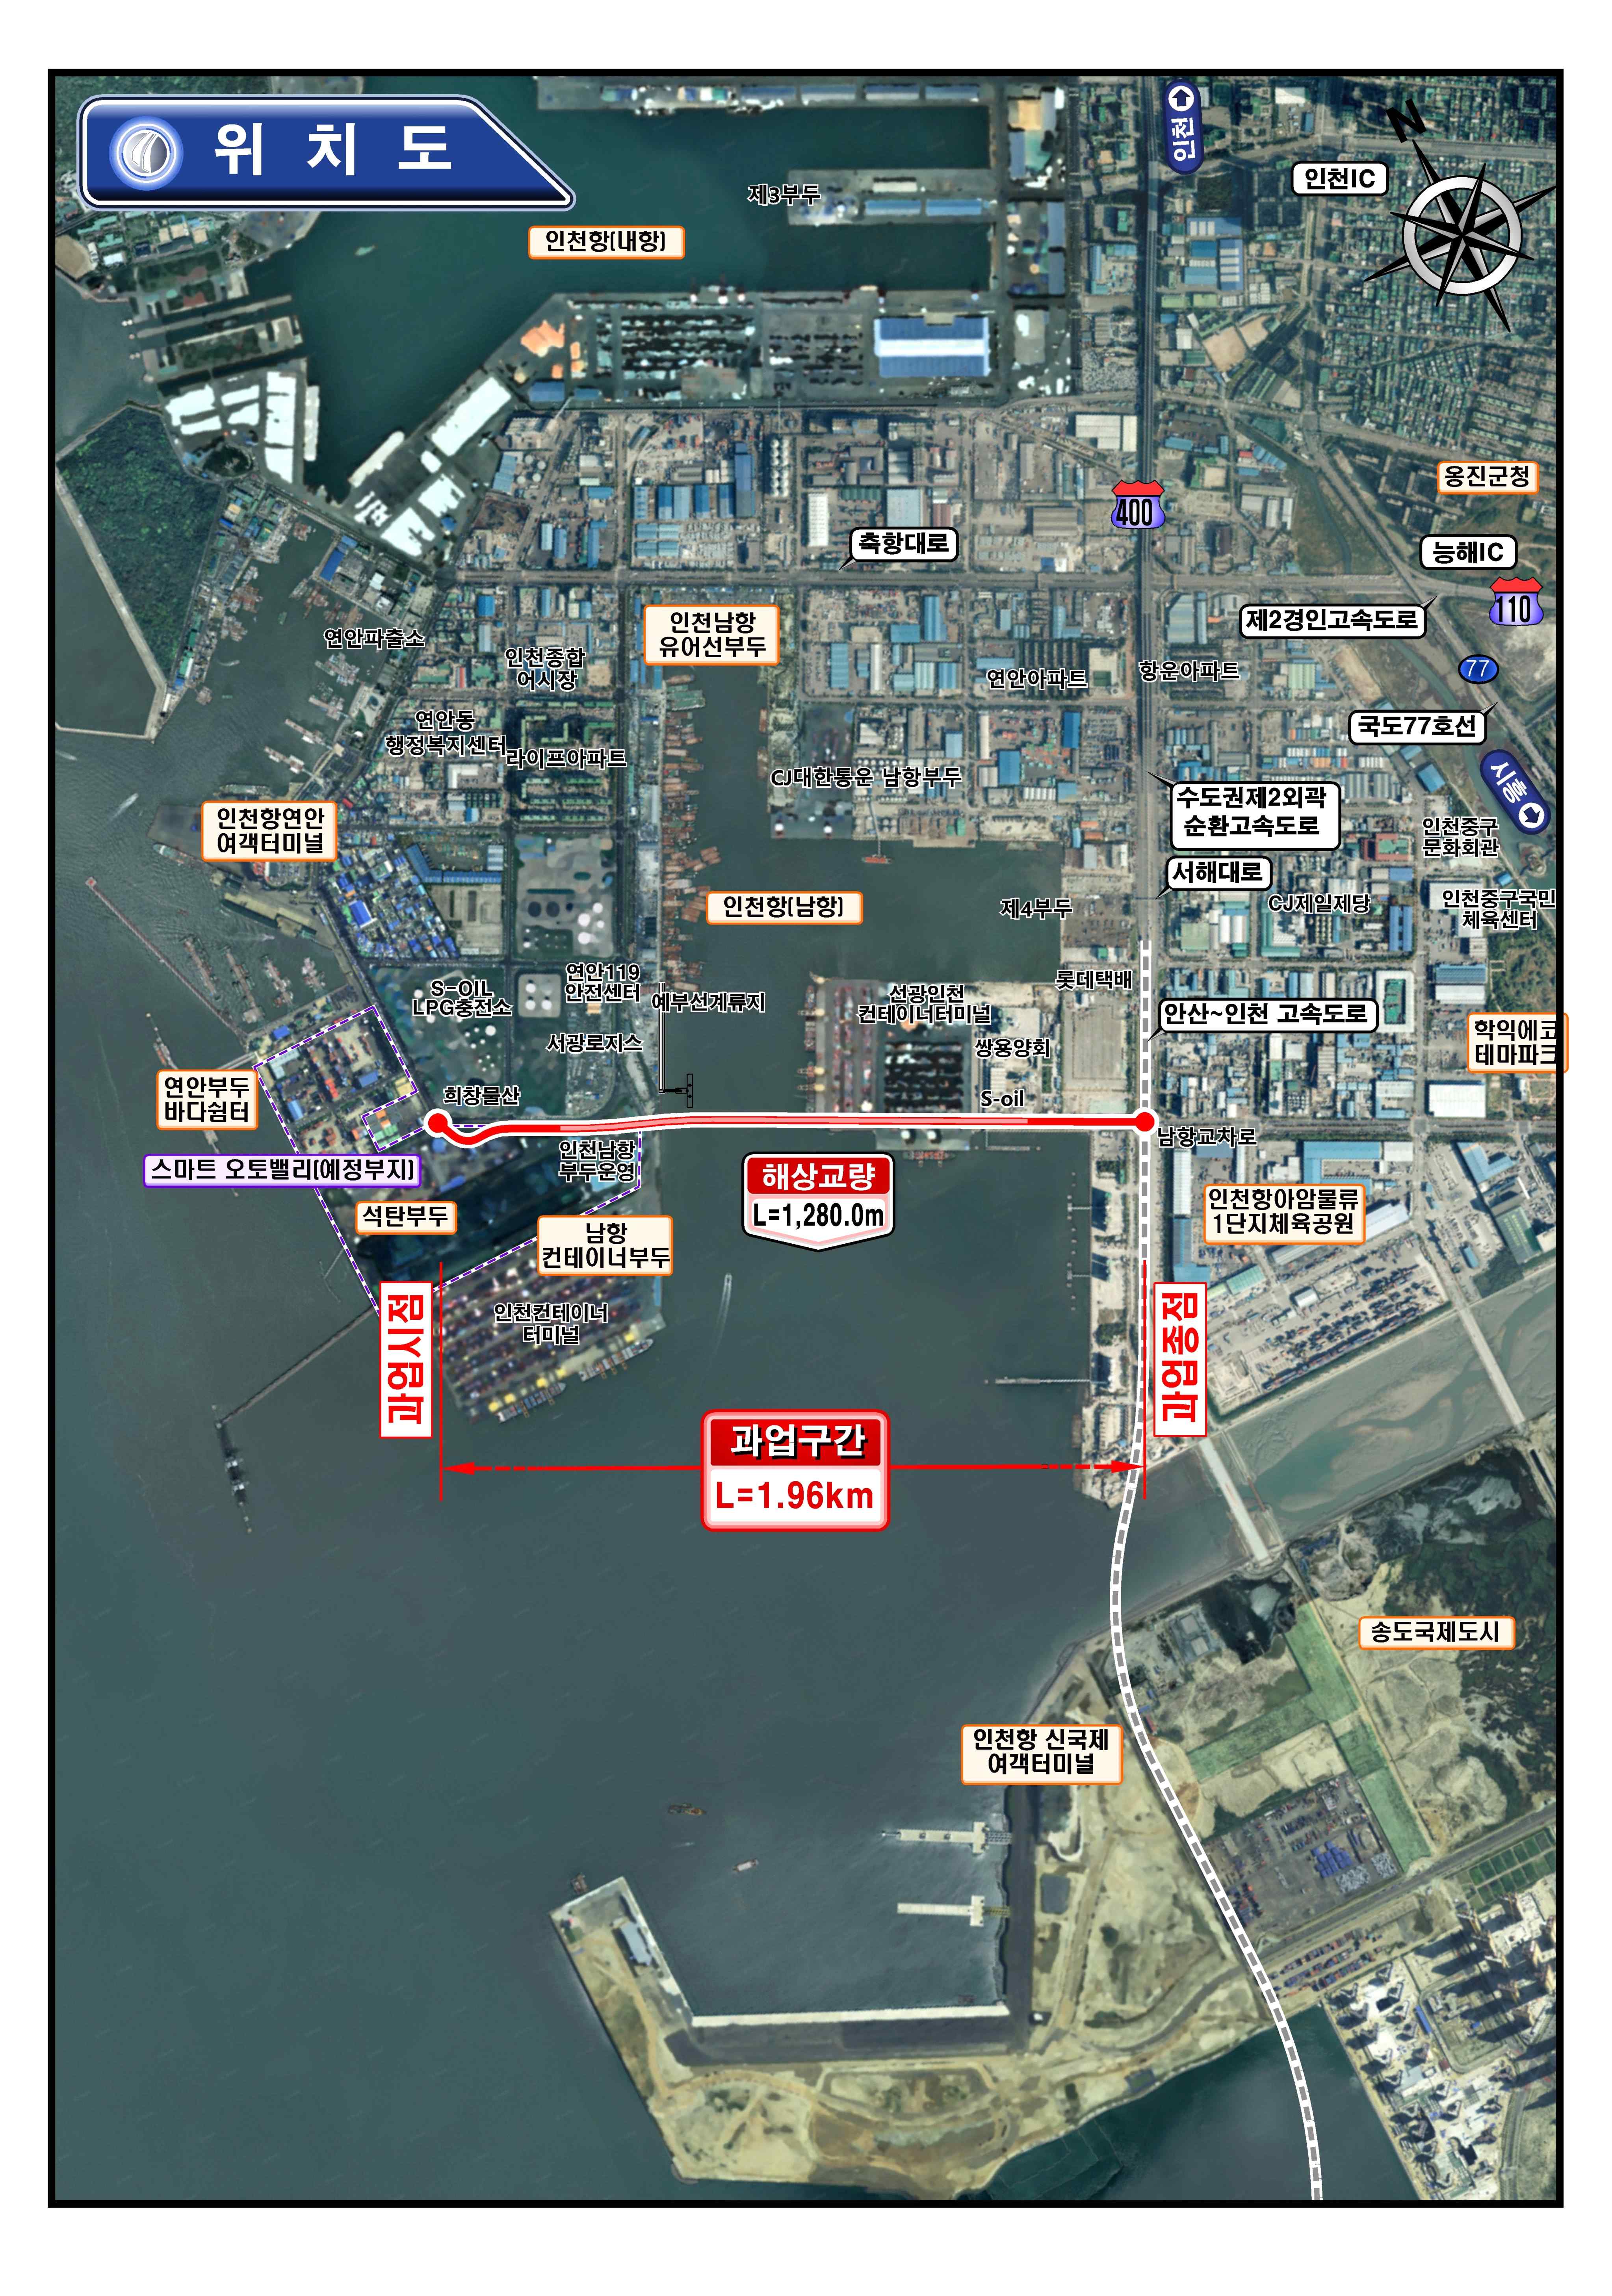 Feasibility study for Incheon South Port bypass construction project